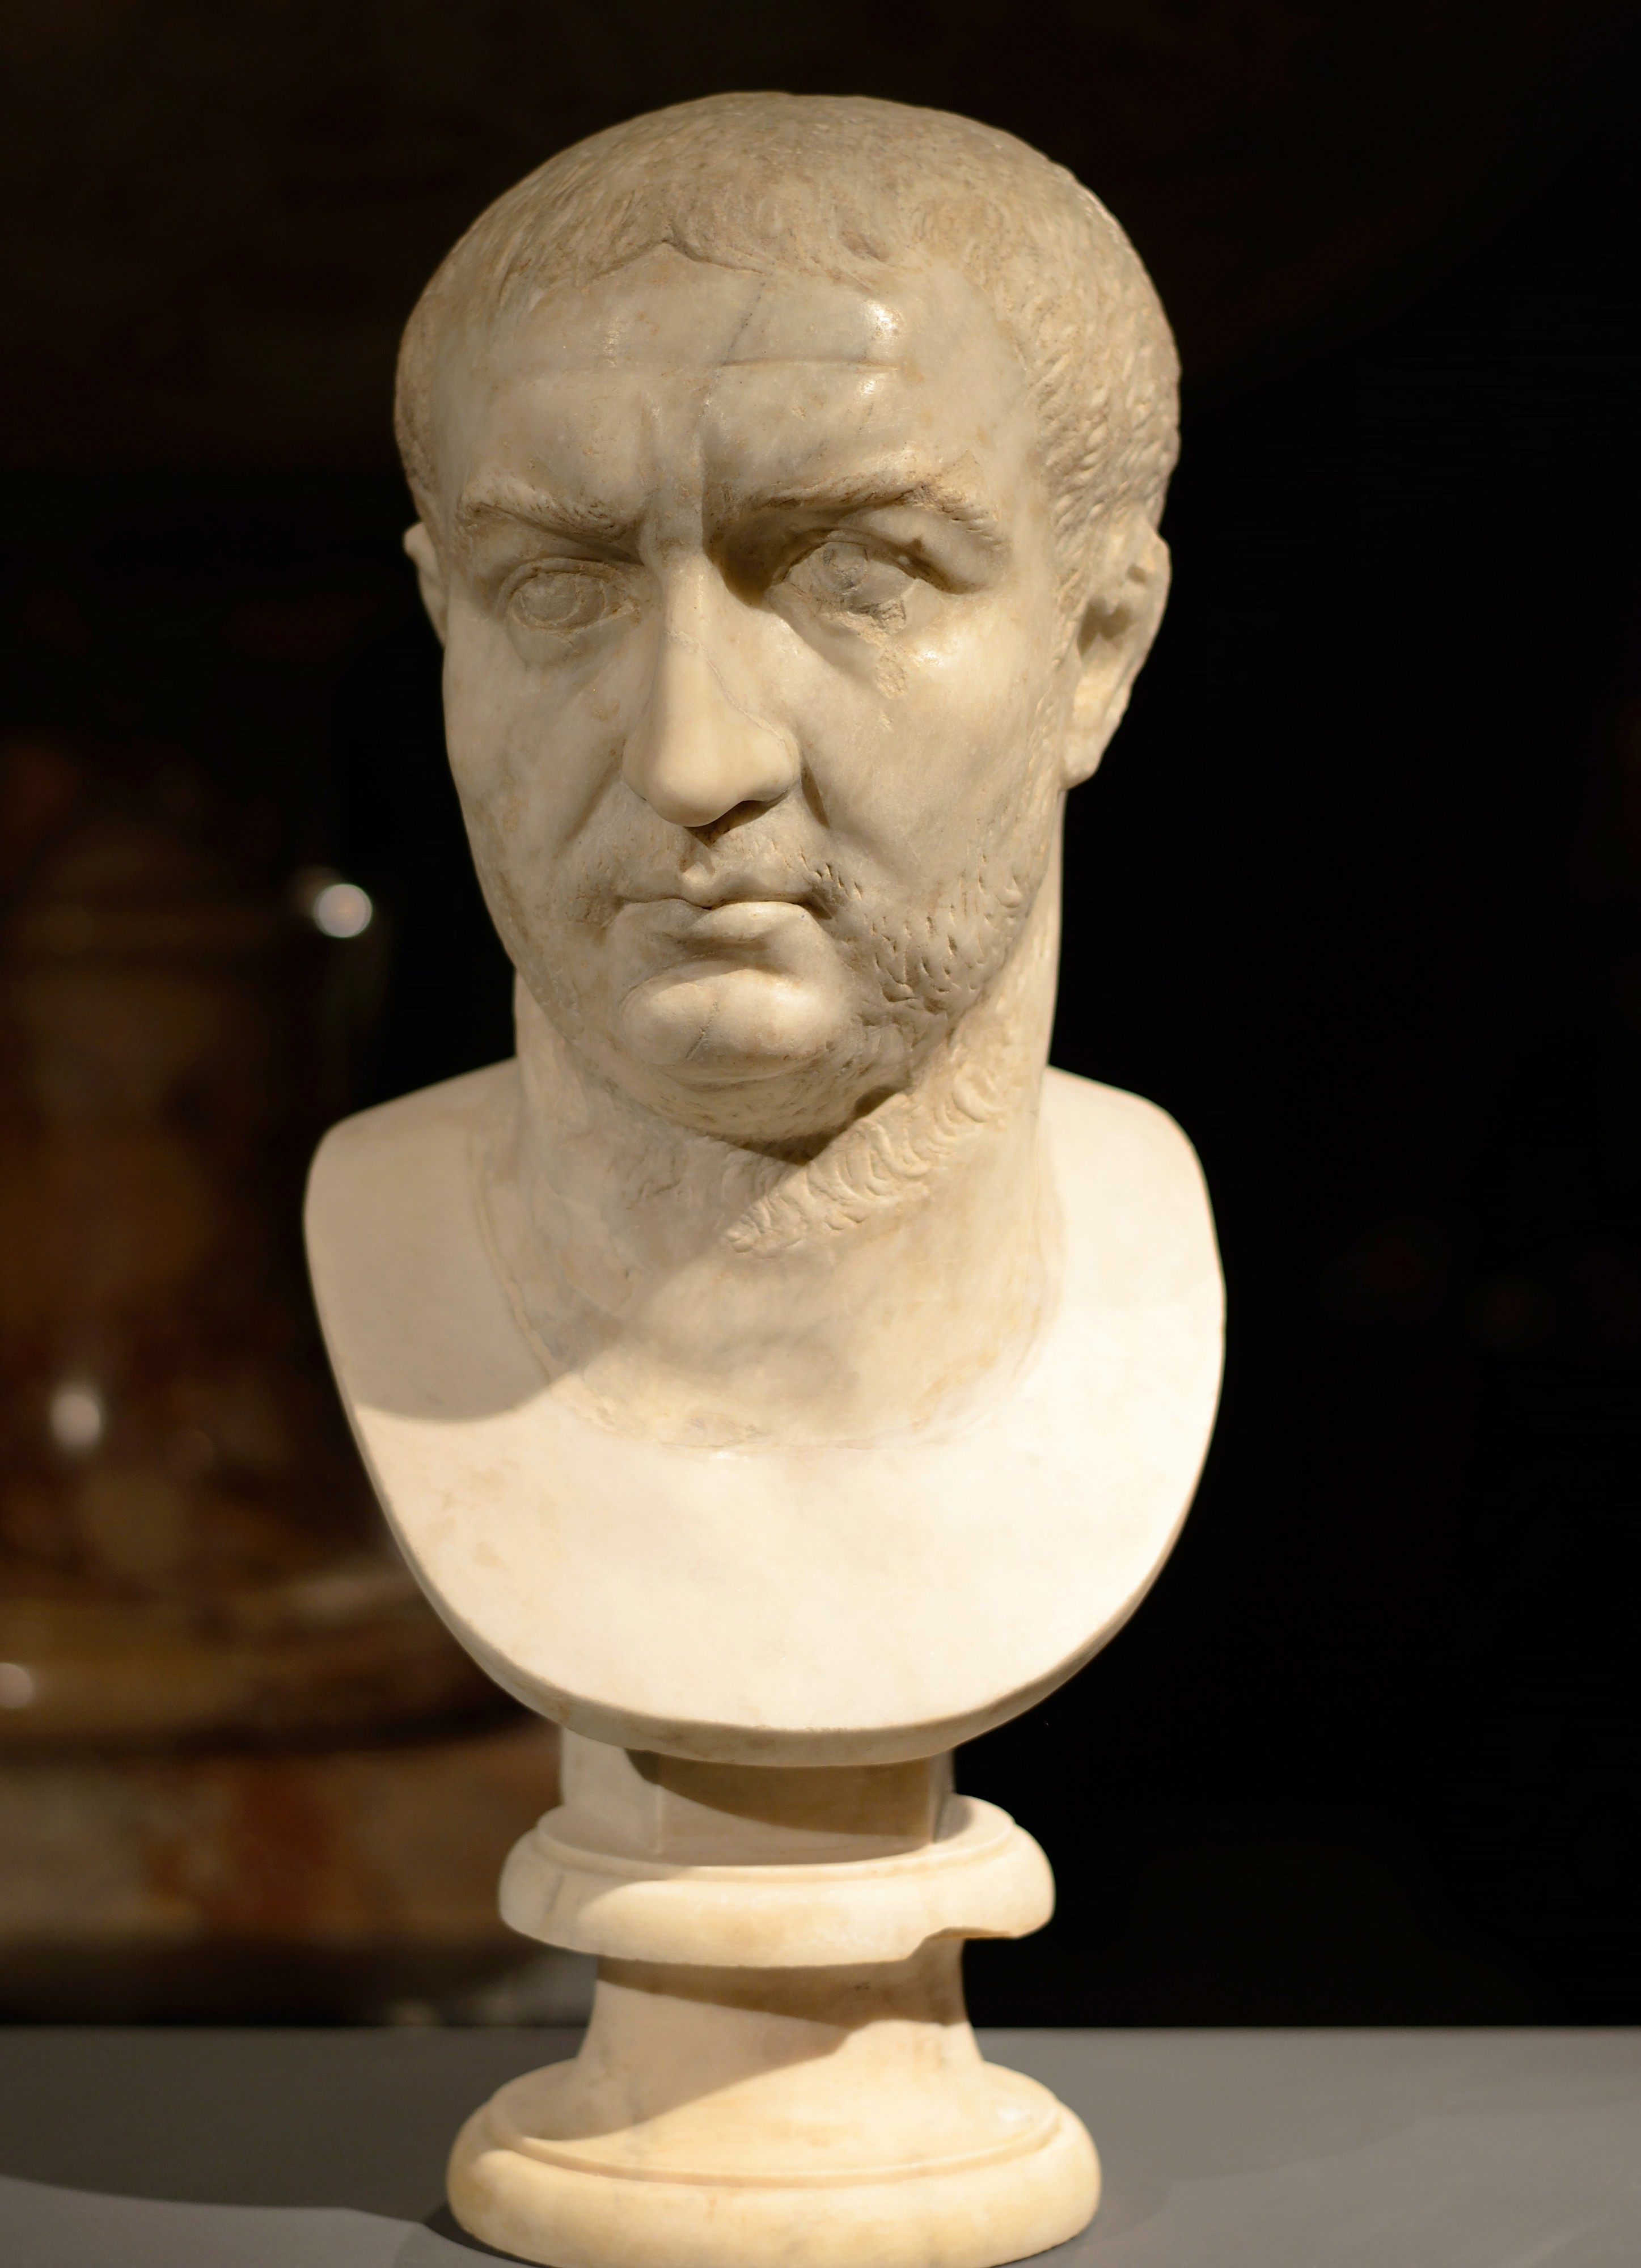 Bust of man in Musei Capitolini